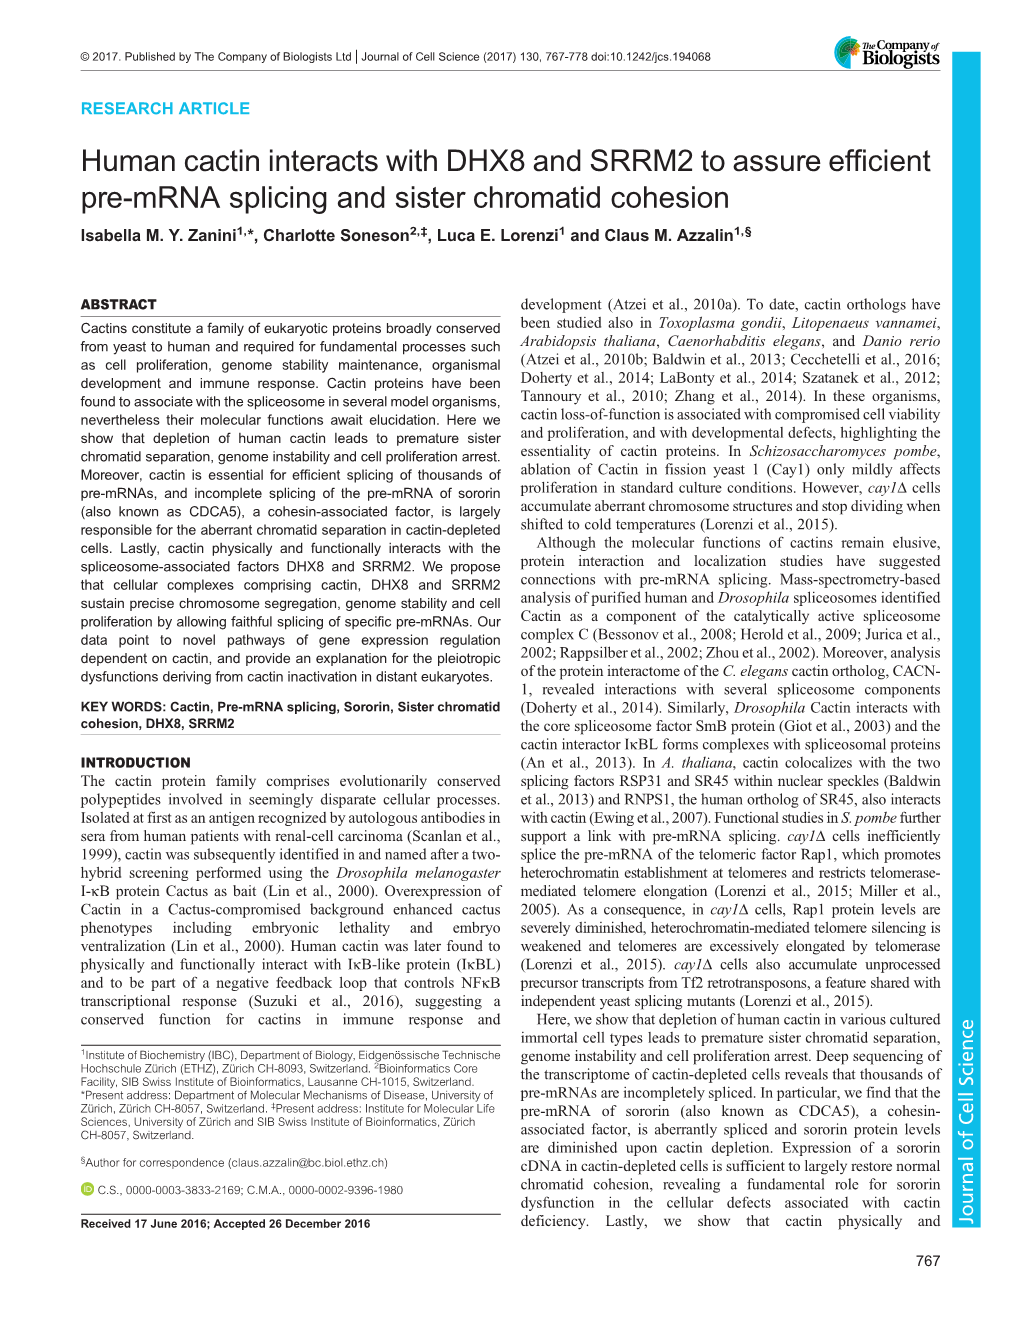 Human Cactin Interacts with DHX8 and SRRM2 to Assure Efficient Pre-Mrna Splicing and Sister Chromatid Cohesion Isabella M